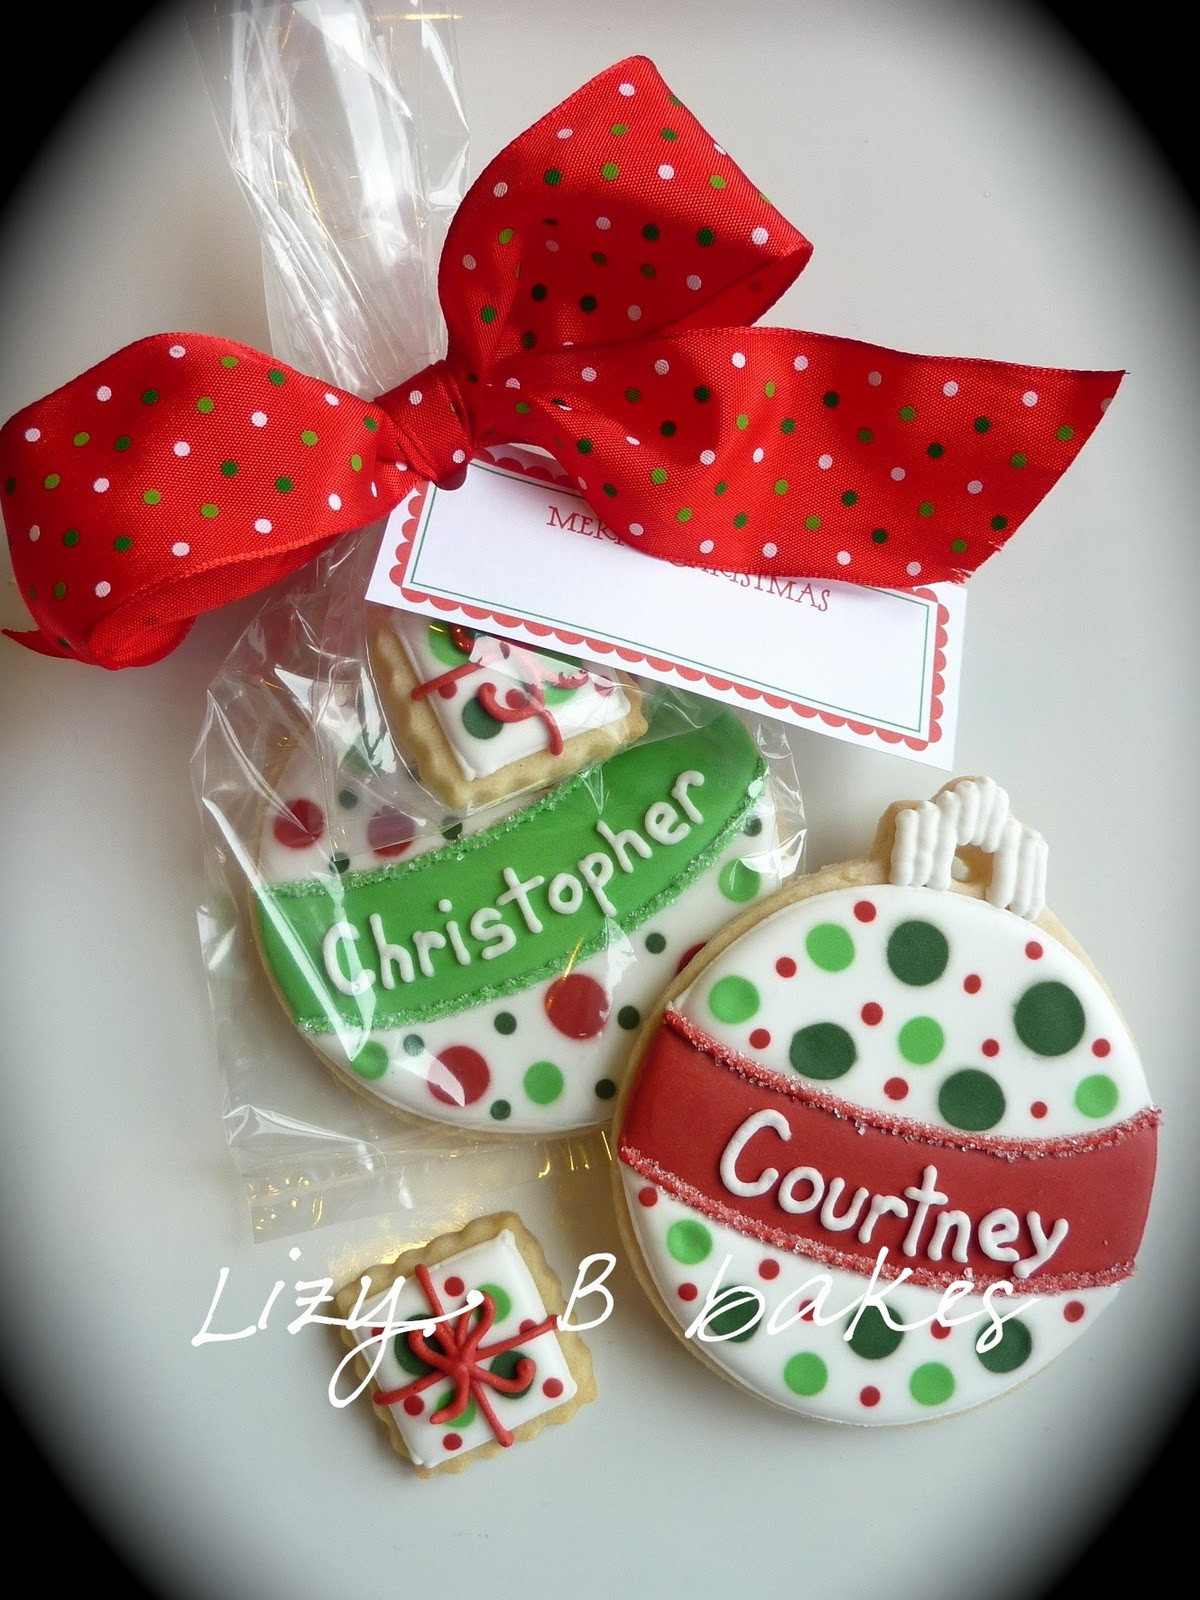 Pictures Of Christmas Cookies
 Lizy B Personalized Christmas Cookies